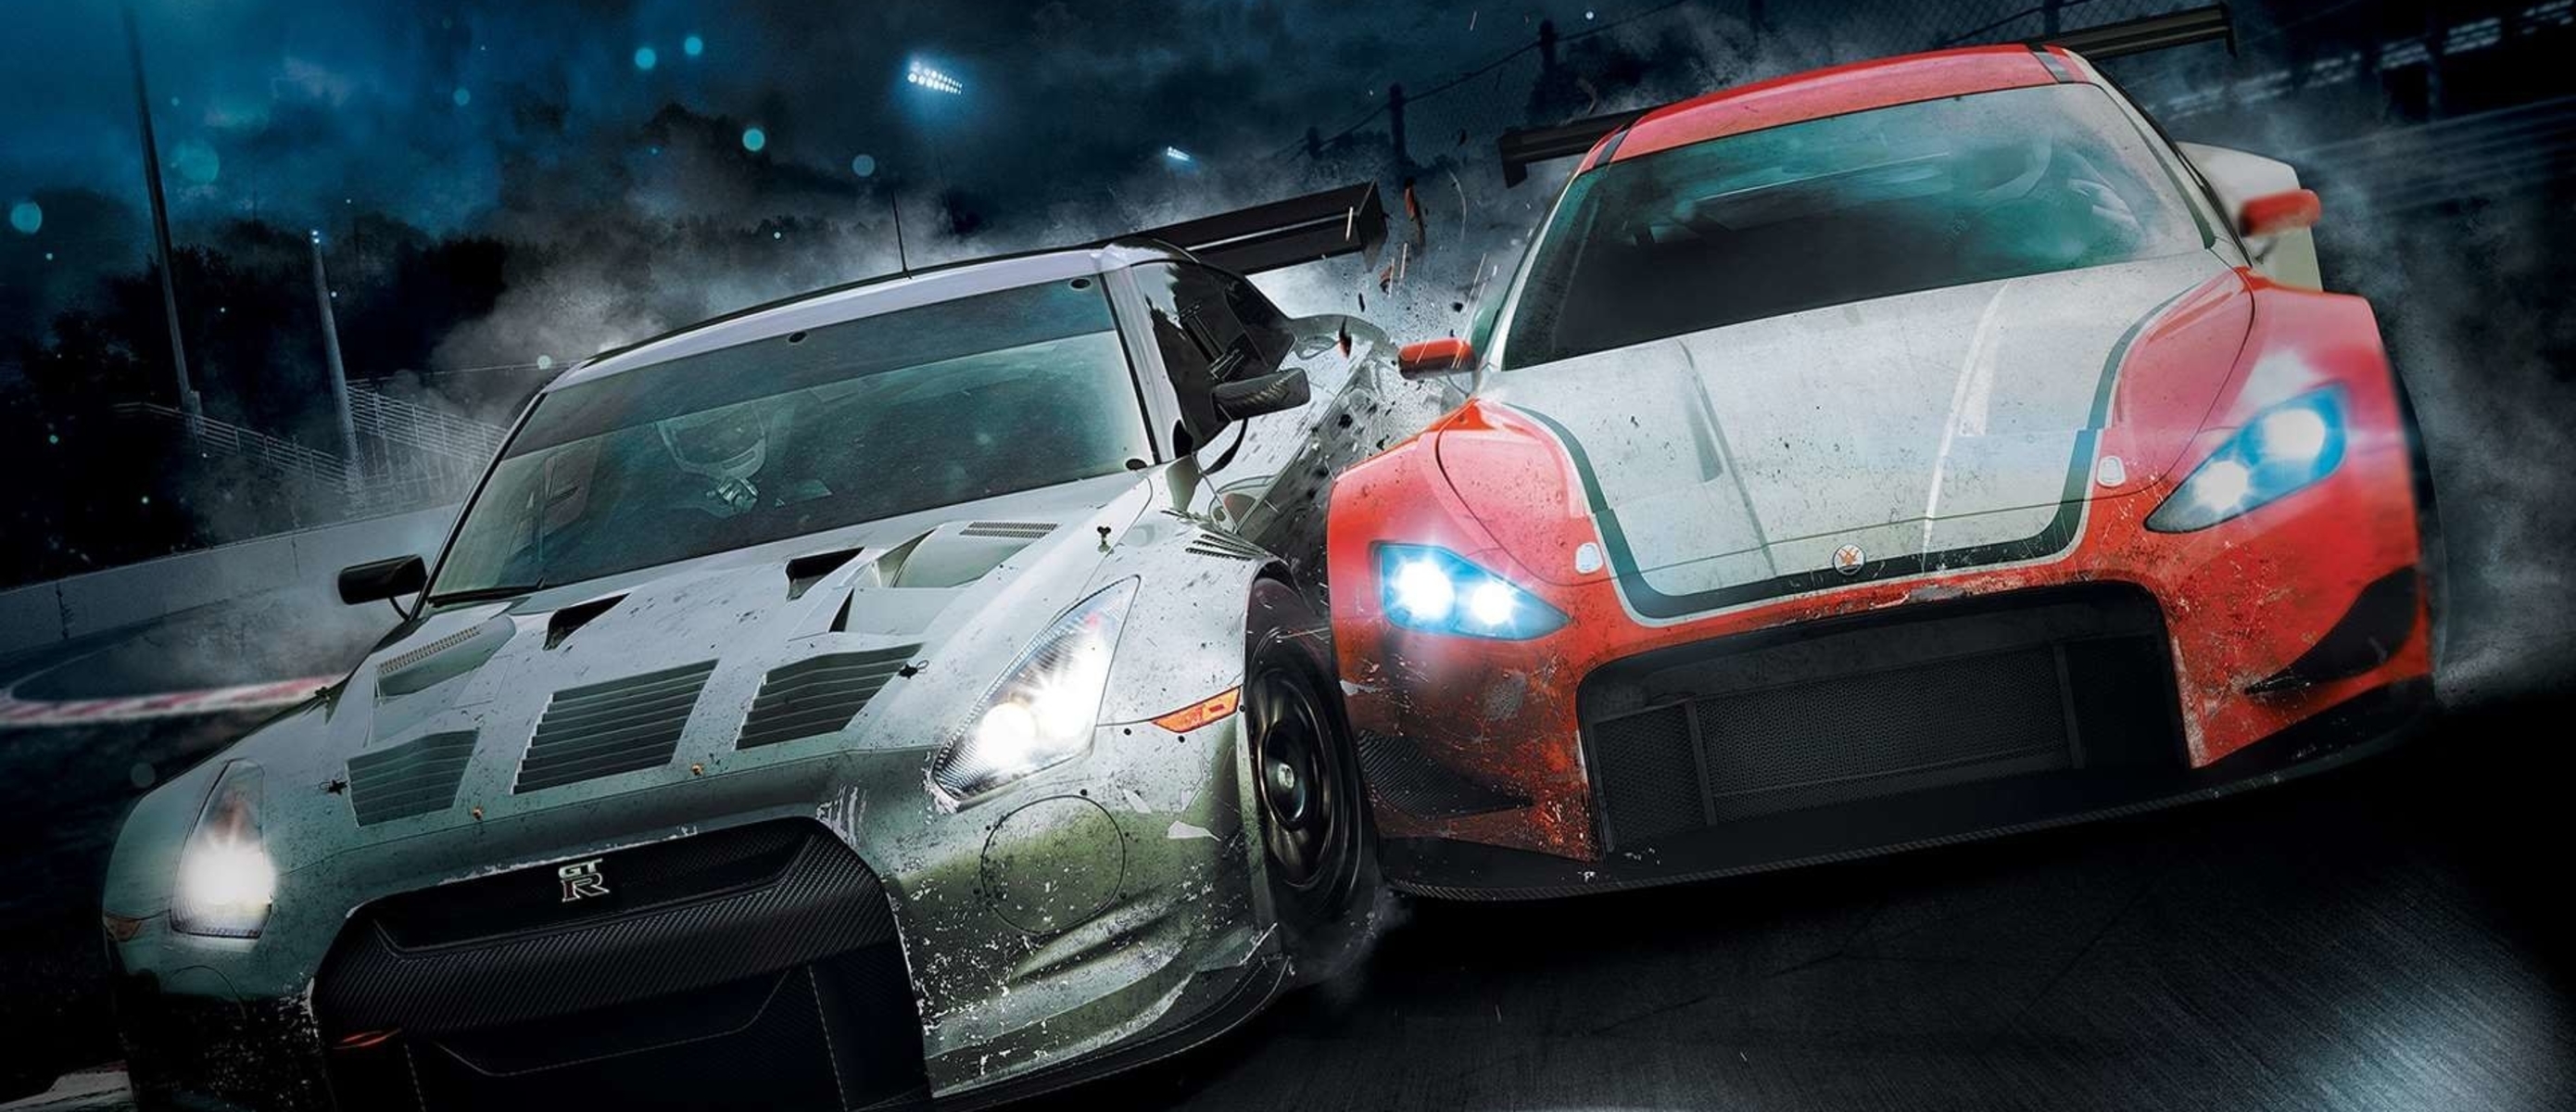 Speed gaming 2. Shift 2 unleashed. Need for Speed Shift 2: unleashed. NFS Shift 2 unleashed гонки. Нфс Shift 2 unleashed.